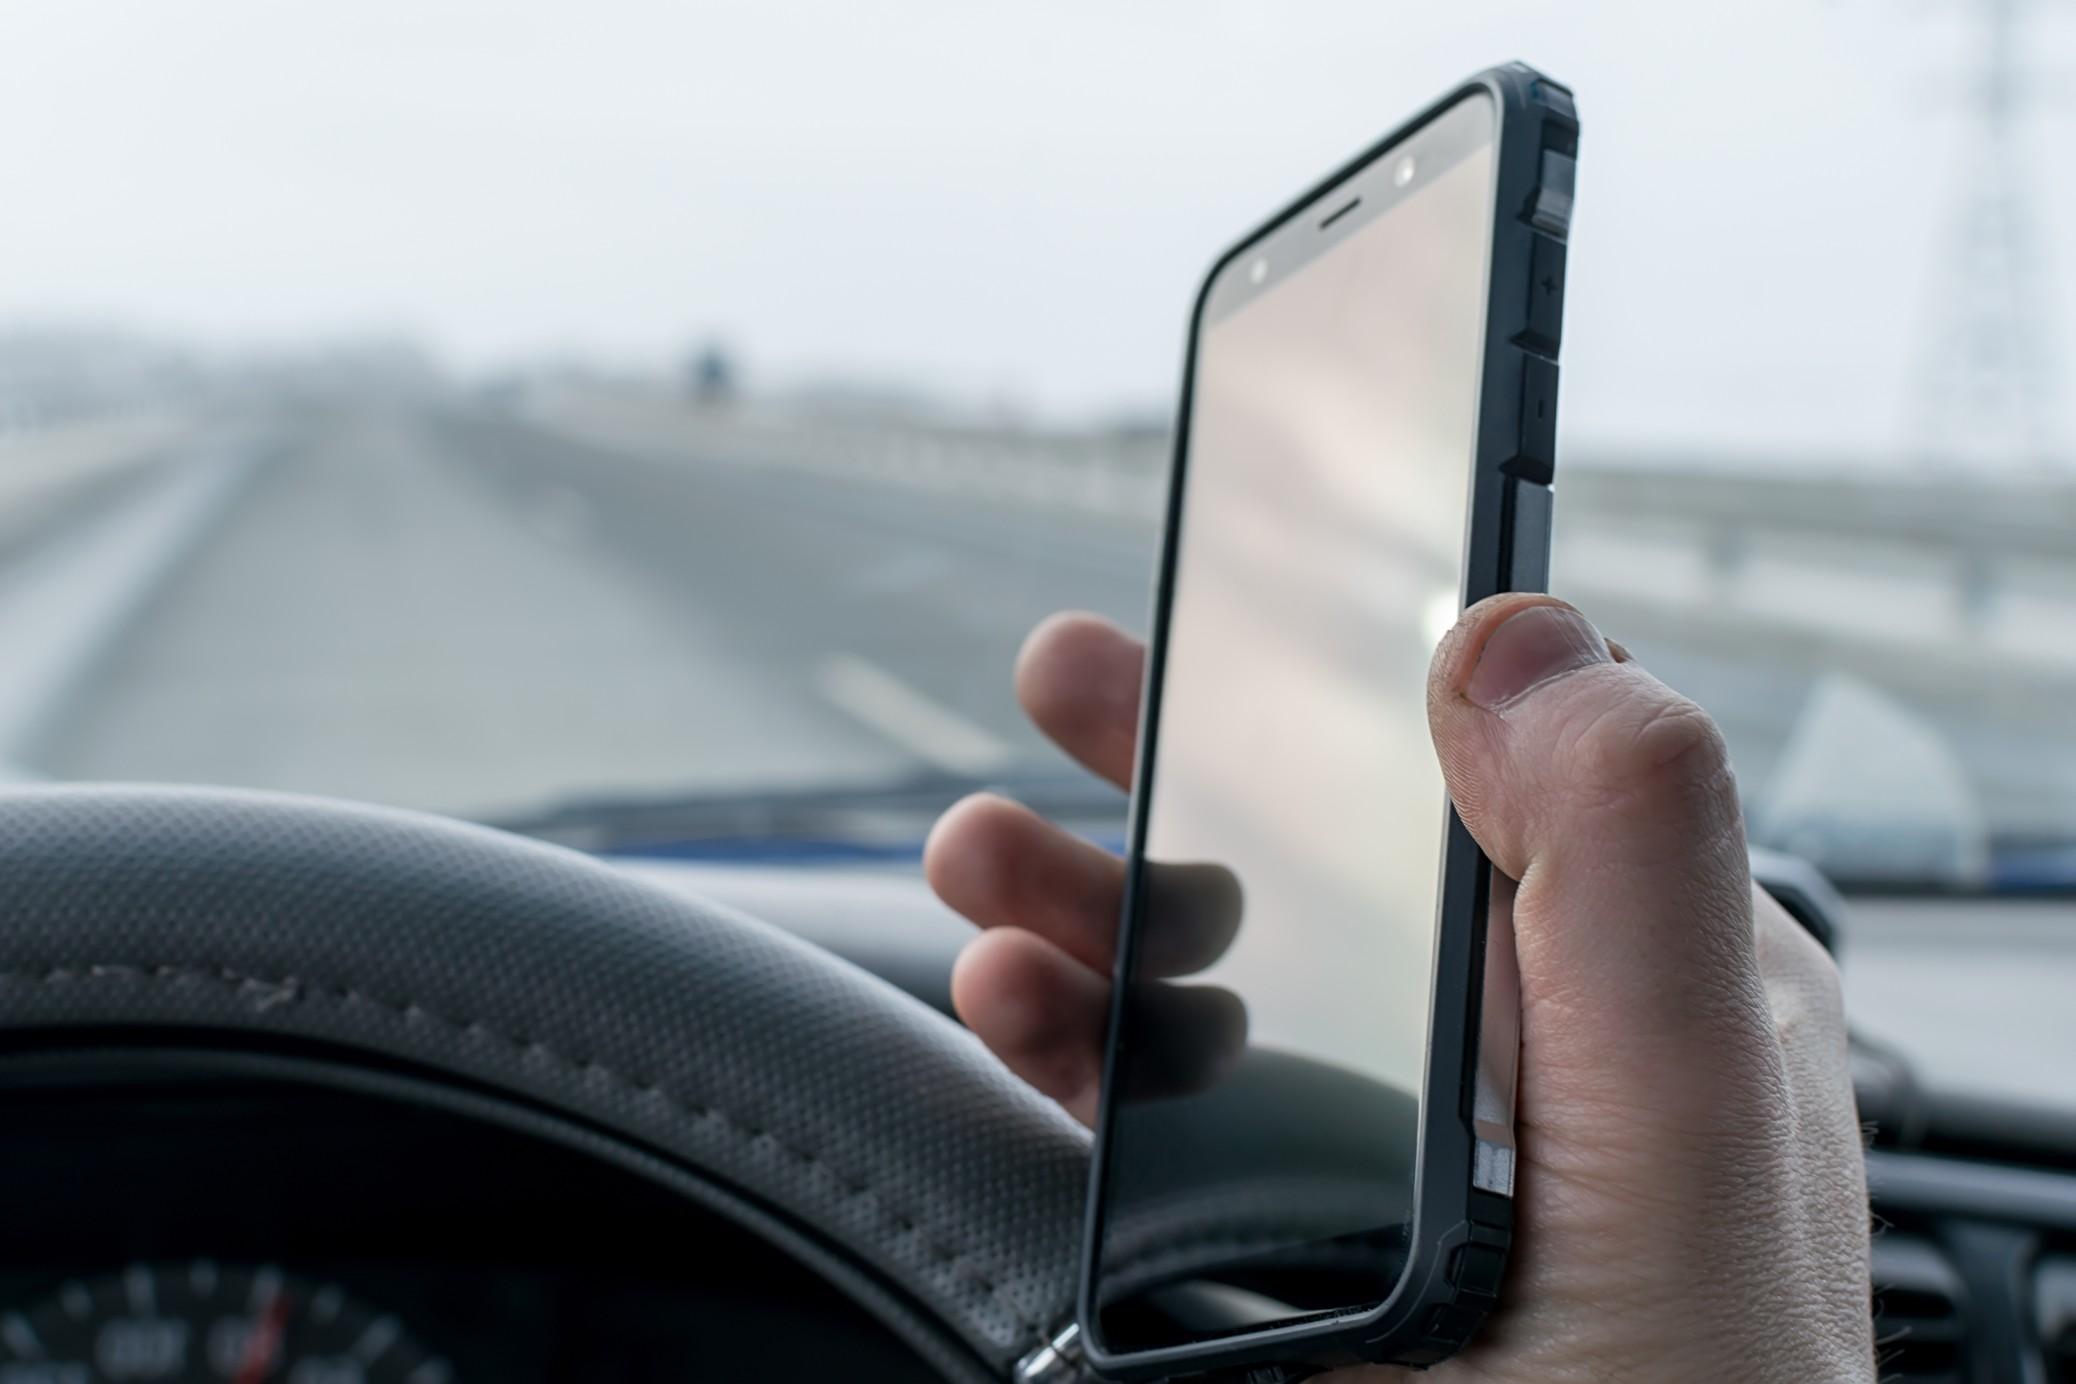 Several states are cracking down on distracted driving.